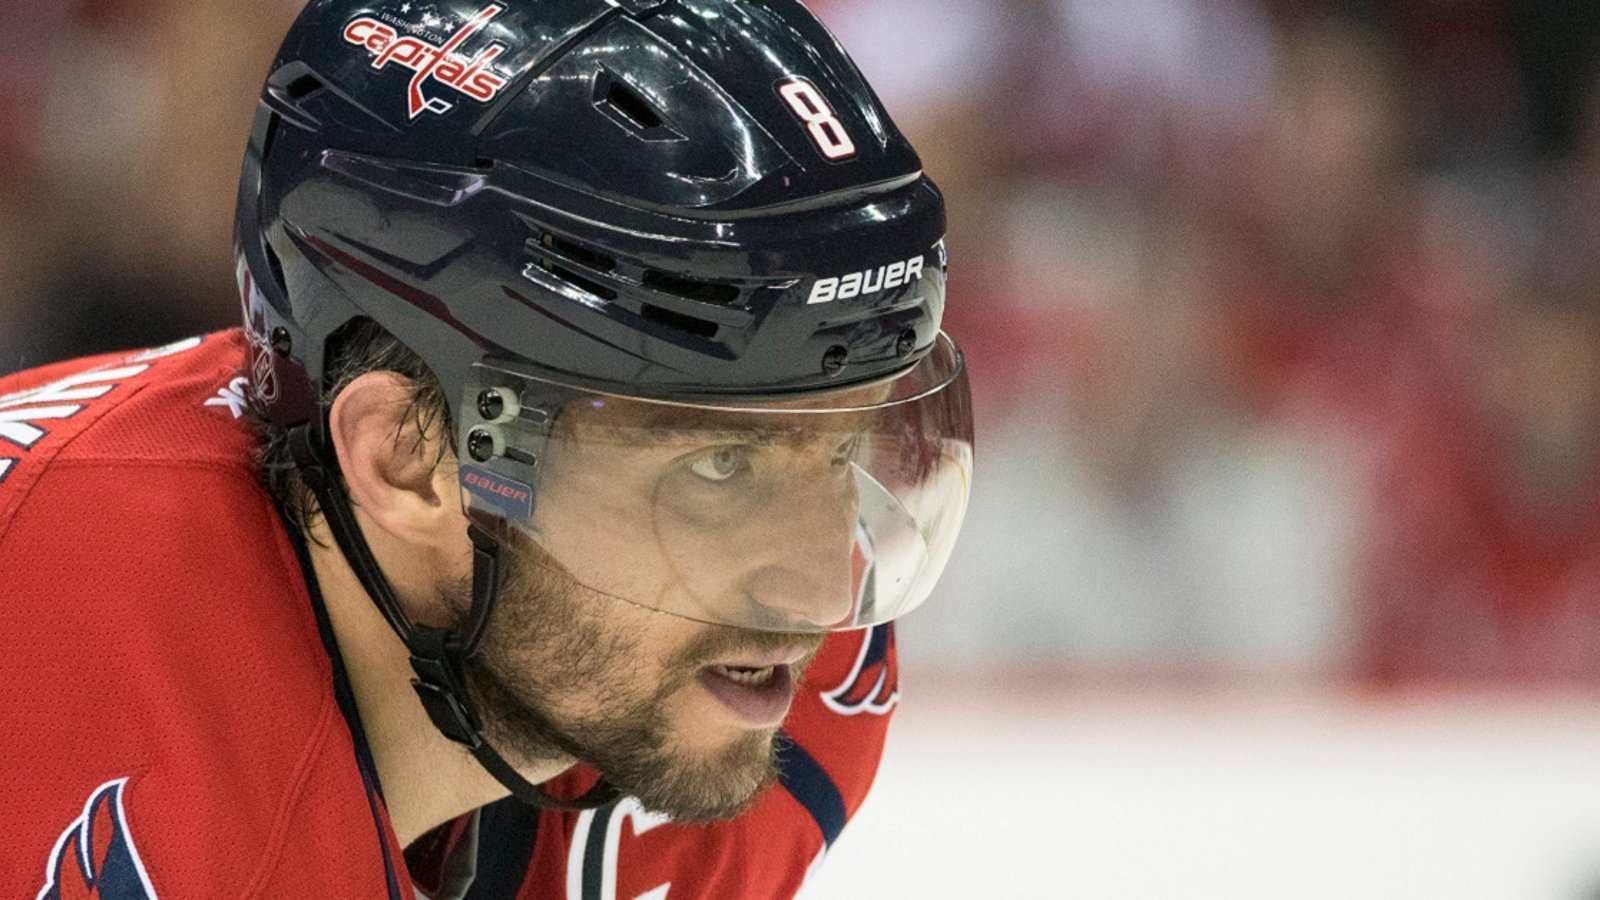 Ridiculous accusations against Alex Ovechkin coming from the Penguins locker room.